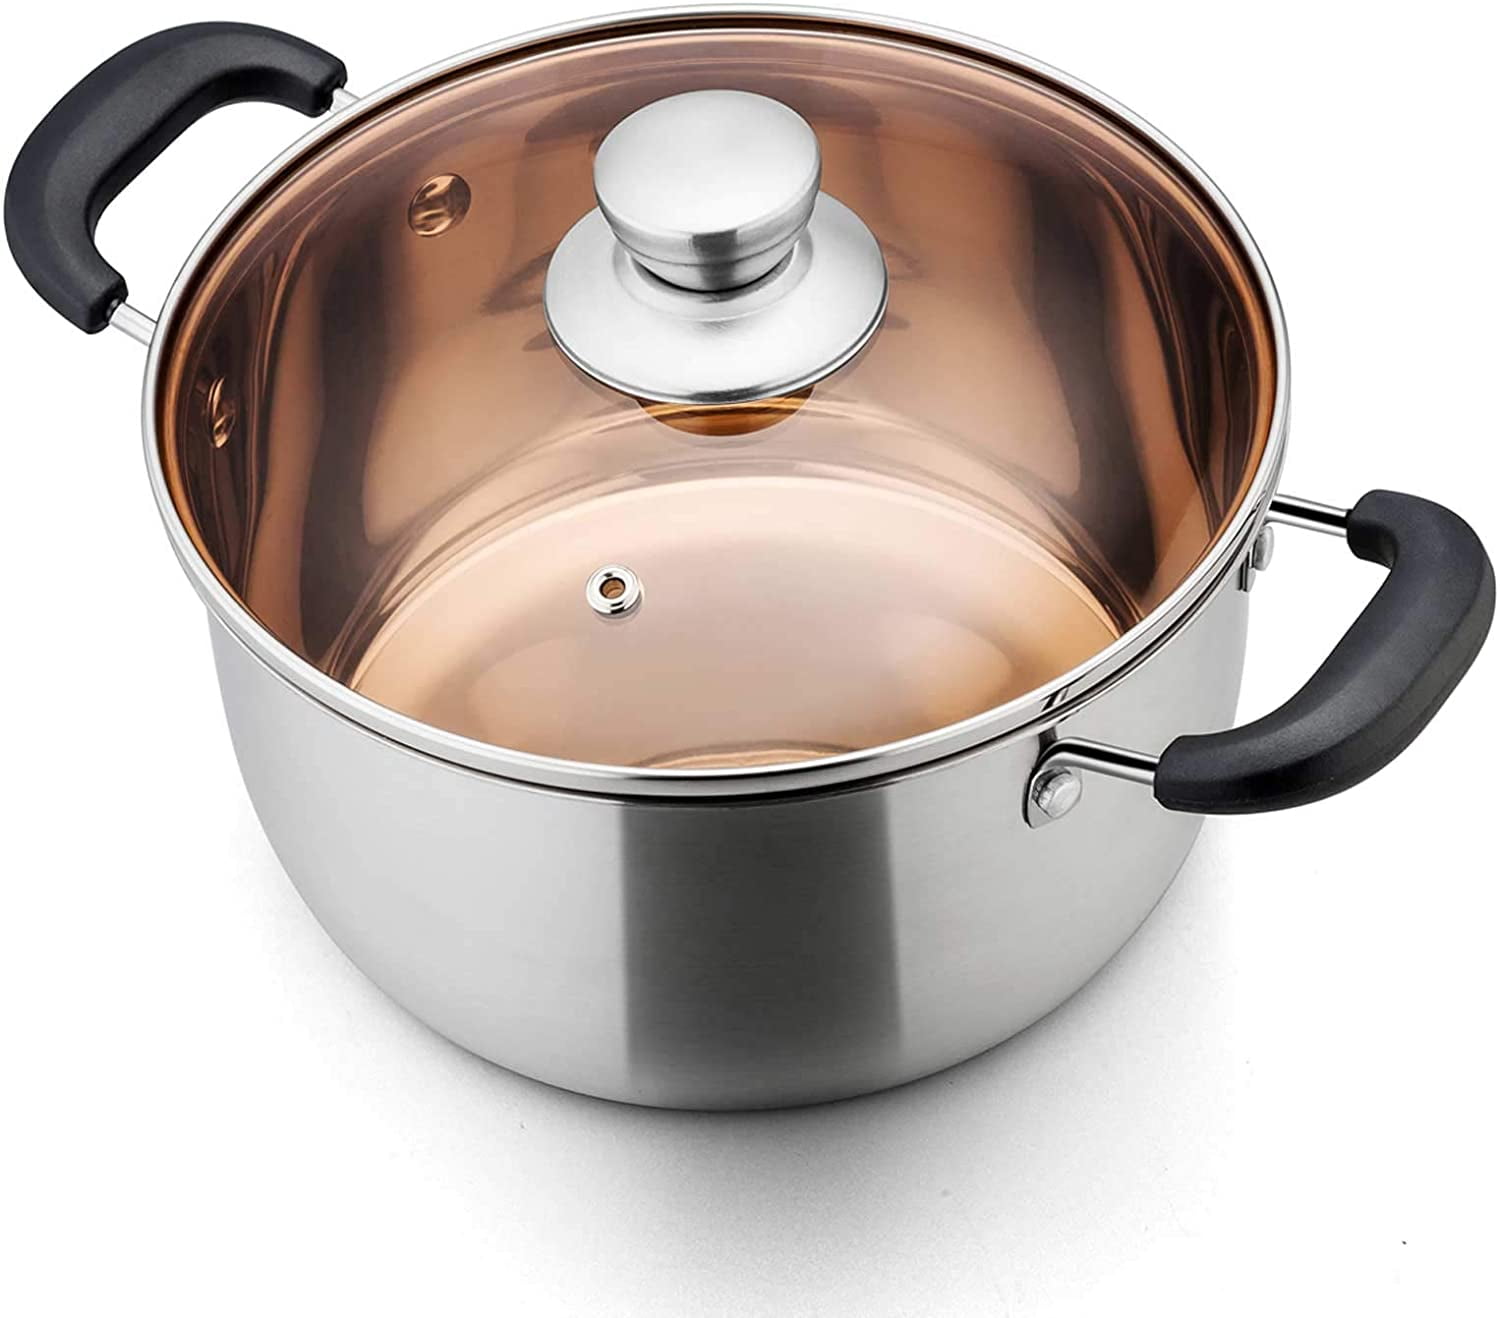 Walchoice 12 Quart 18/10 Stainless Steel Stockpot with Glass Lid, Extra  Large Soup Pot Cookware with Measuring Markings for Cooking Simmering  Stewing